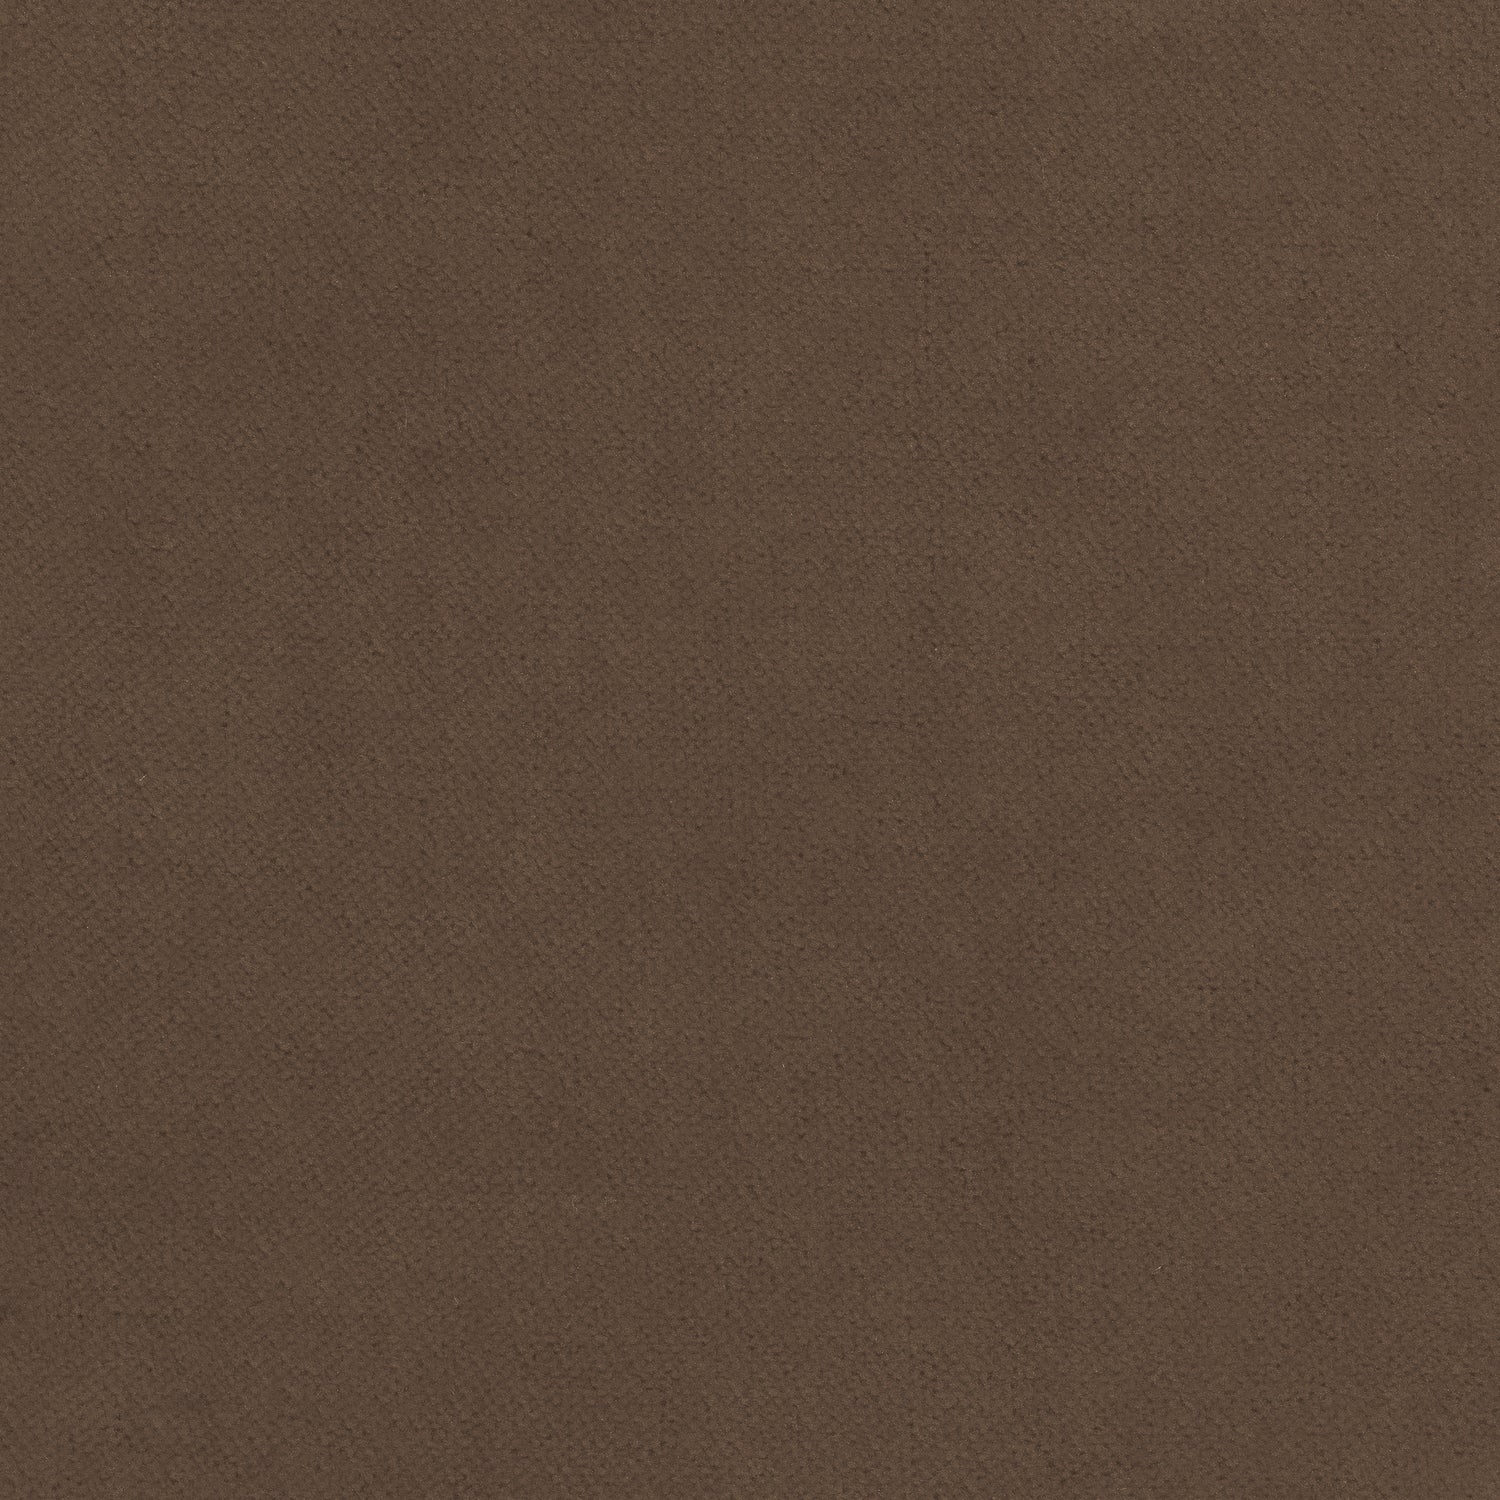 Club Velvet fabric in mink color - pattern number W7226 - by Thibaut in the Club Velvet collection